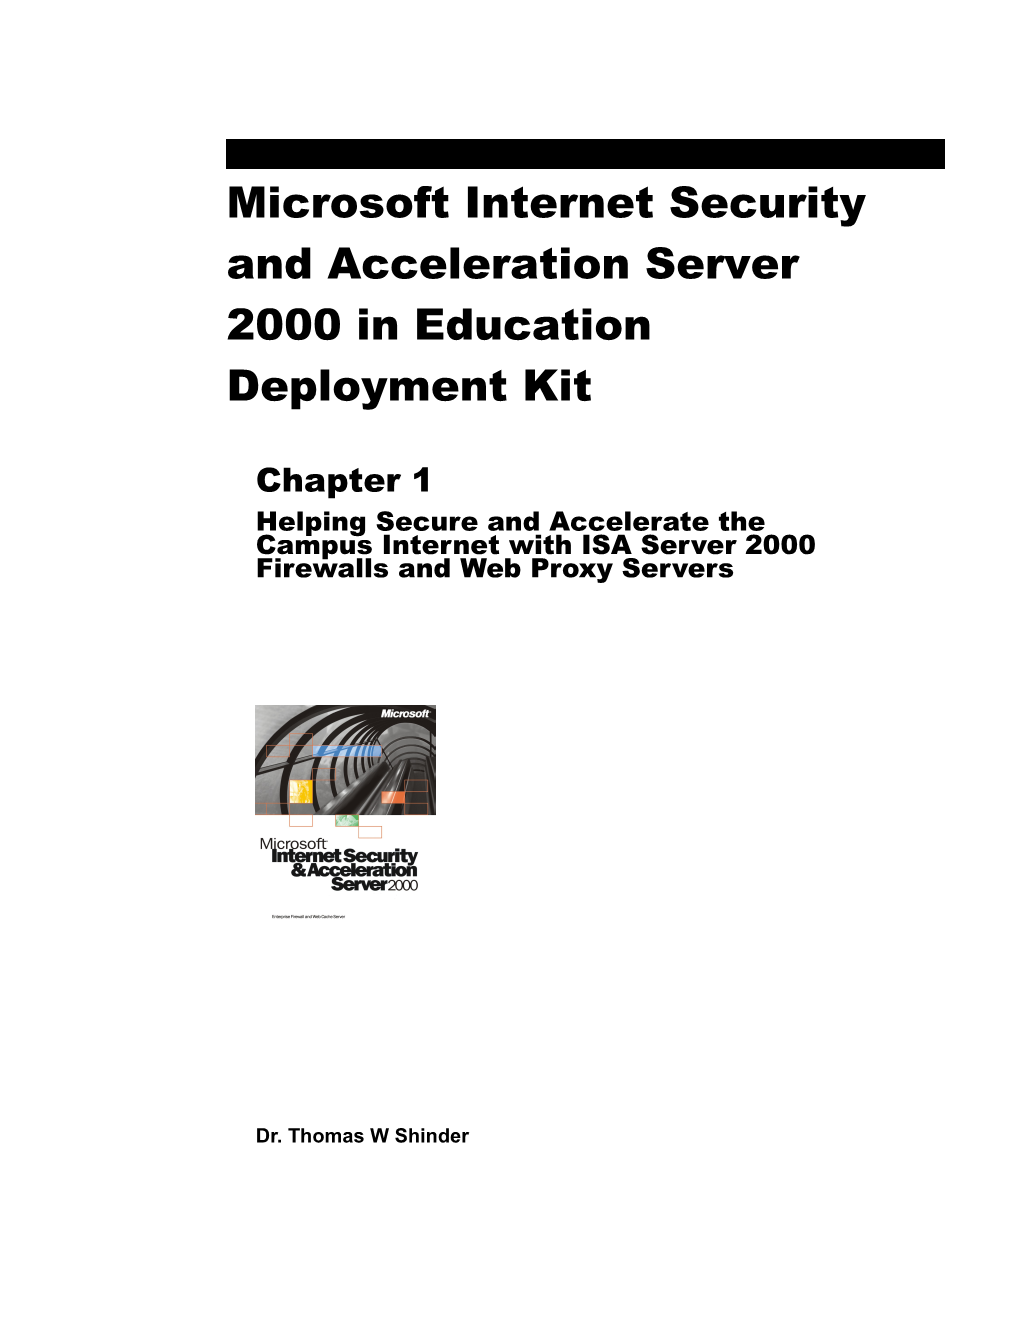 Helping Secure And Accelerate The Campus Internet Experience With ISA Server 2000